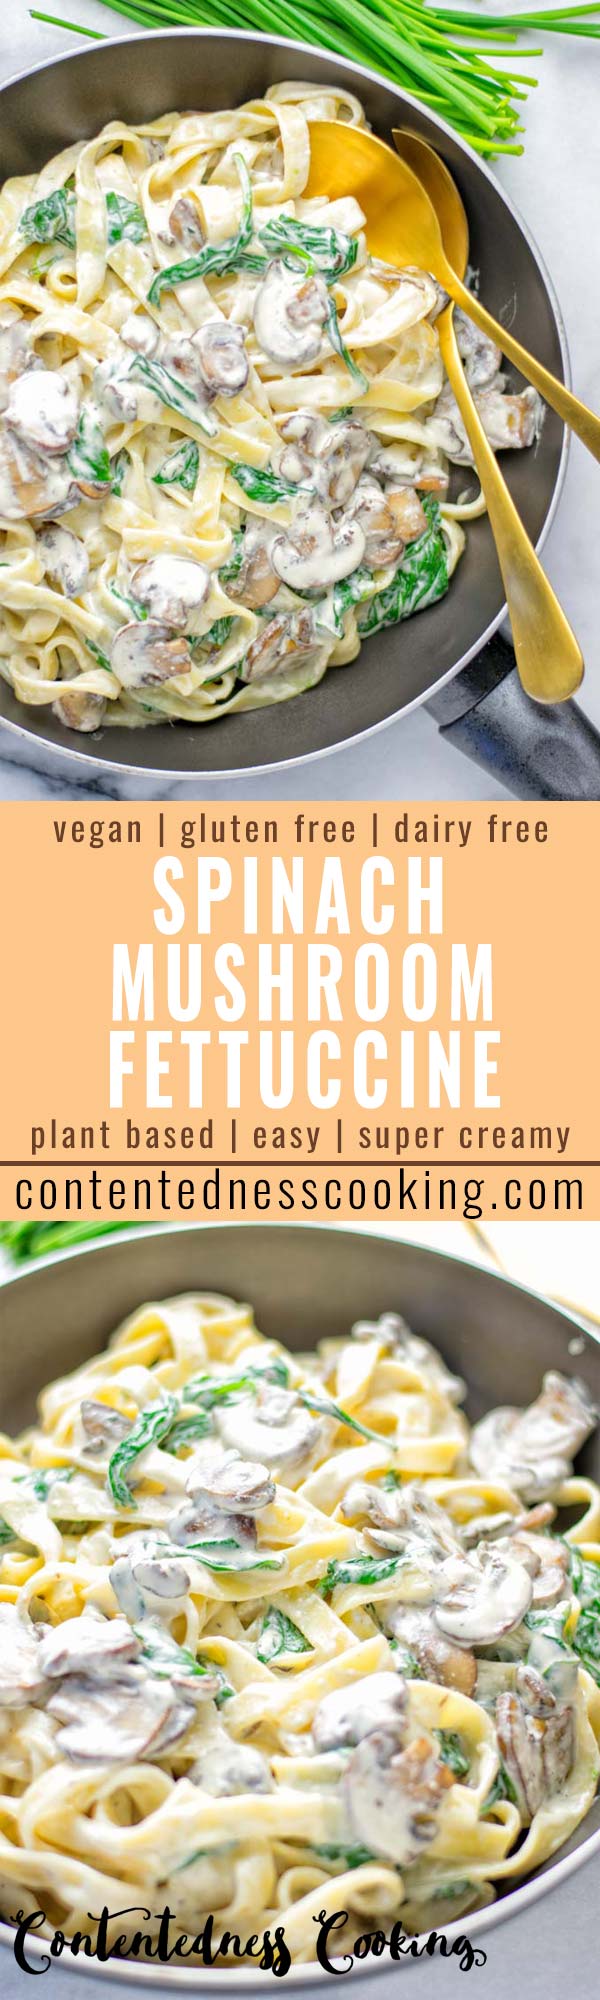 Super creamy and easy to make: Spinach Mushroom Fettuccine Alfredo entirely vegan, gluten free and the ultimate comfort food for dinner, lunch, meal preparation that the whole family will love. If you’re looking for a delicious fettuccine Alfredo recipe try it now, it’s a keeper. #vegan #glutenfree #dairyfree #vegetarian #contentednesscooking #dinner #lunch #mealprep #worklunchideas #fettuccinealfredo #spinachrecipes #mushroomrecipes #familydinnerideas #fettuccinerecipes #easy20minutemeals